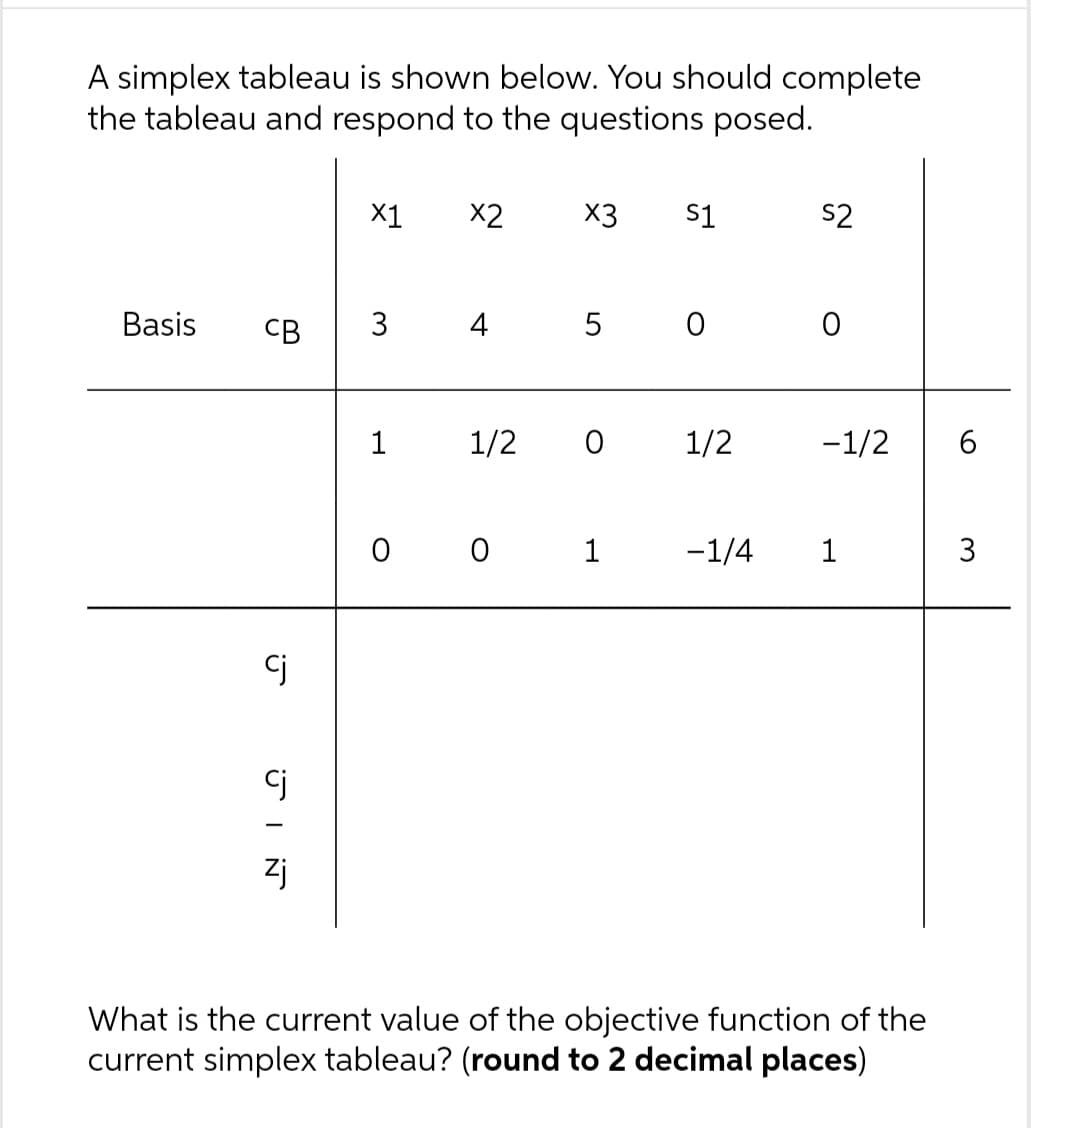 A simplex tableau is shown below. You should complete
the tableau and respond to the questions posed.
Basis CB
cj
JIN
Cj
Zj
X1
3
1
X2
4
x3
0 0
5
1/2 0
1
S1
O
1/2
S2
O
-1/2 6
-1/4 1
What is the current value of the objective function of the
current simplex tableau? (round to 2 decimal places)
3